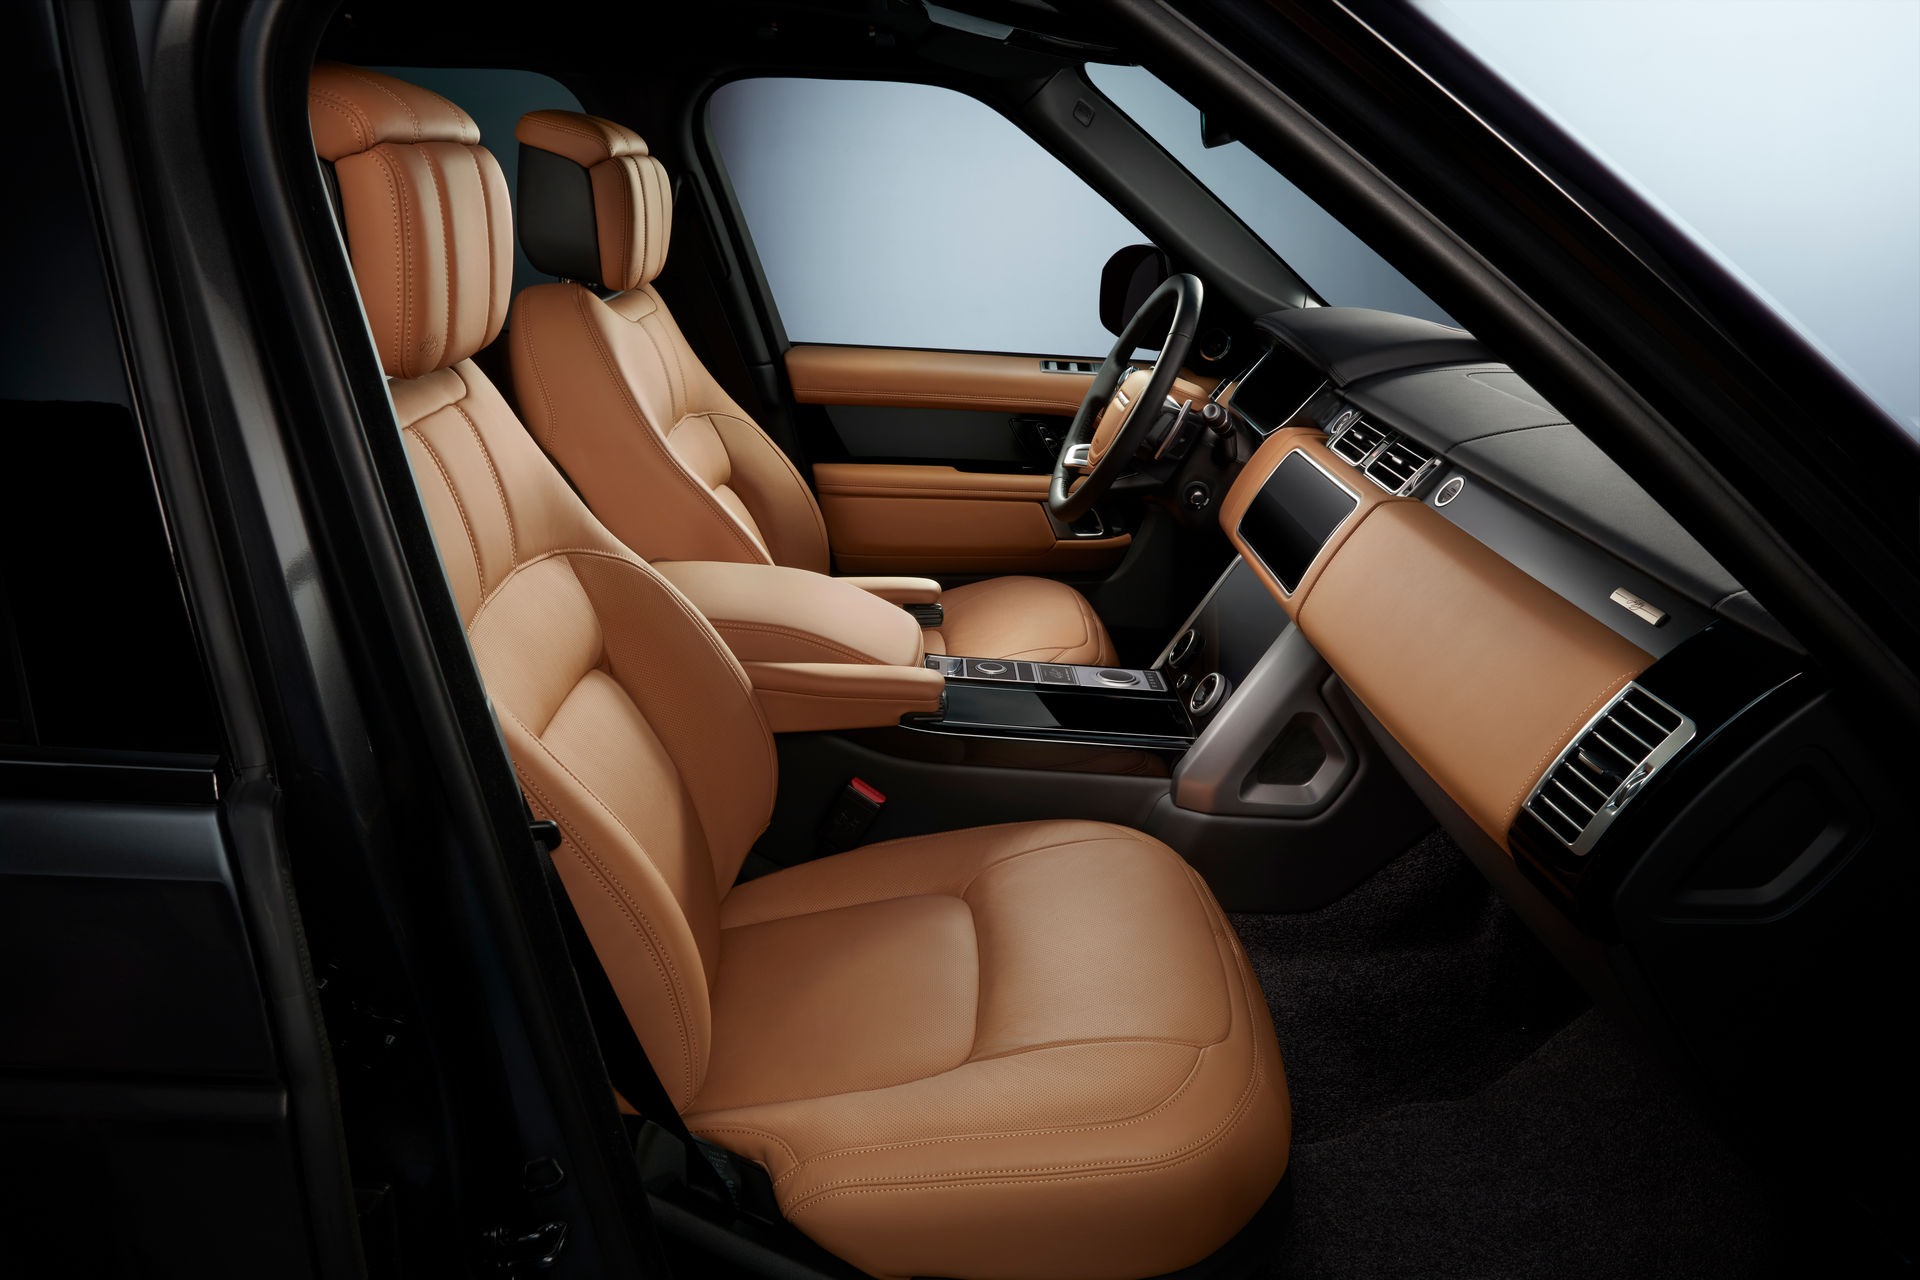 Range Rover Inside Seats  - The 2013 Range Rover, The Fourth Generation Of The Iconic Luxury Suv, Is Now In Dealerships.